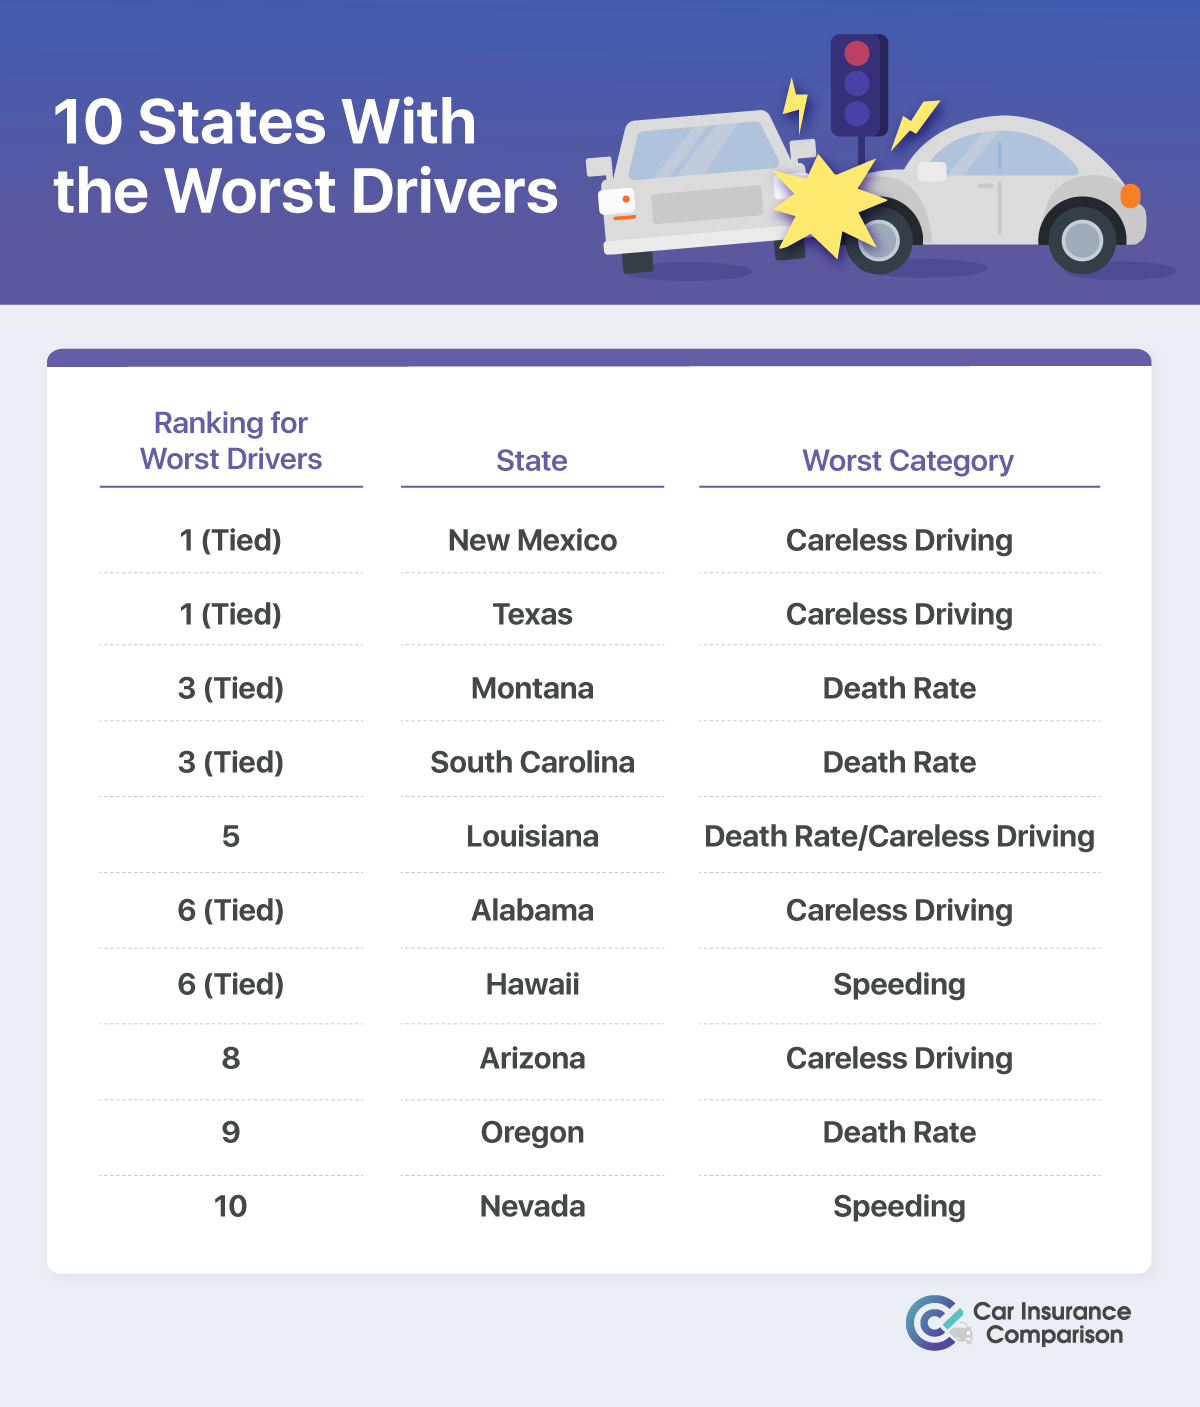 10 States With the Worst Drivers